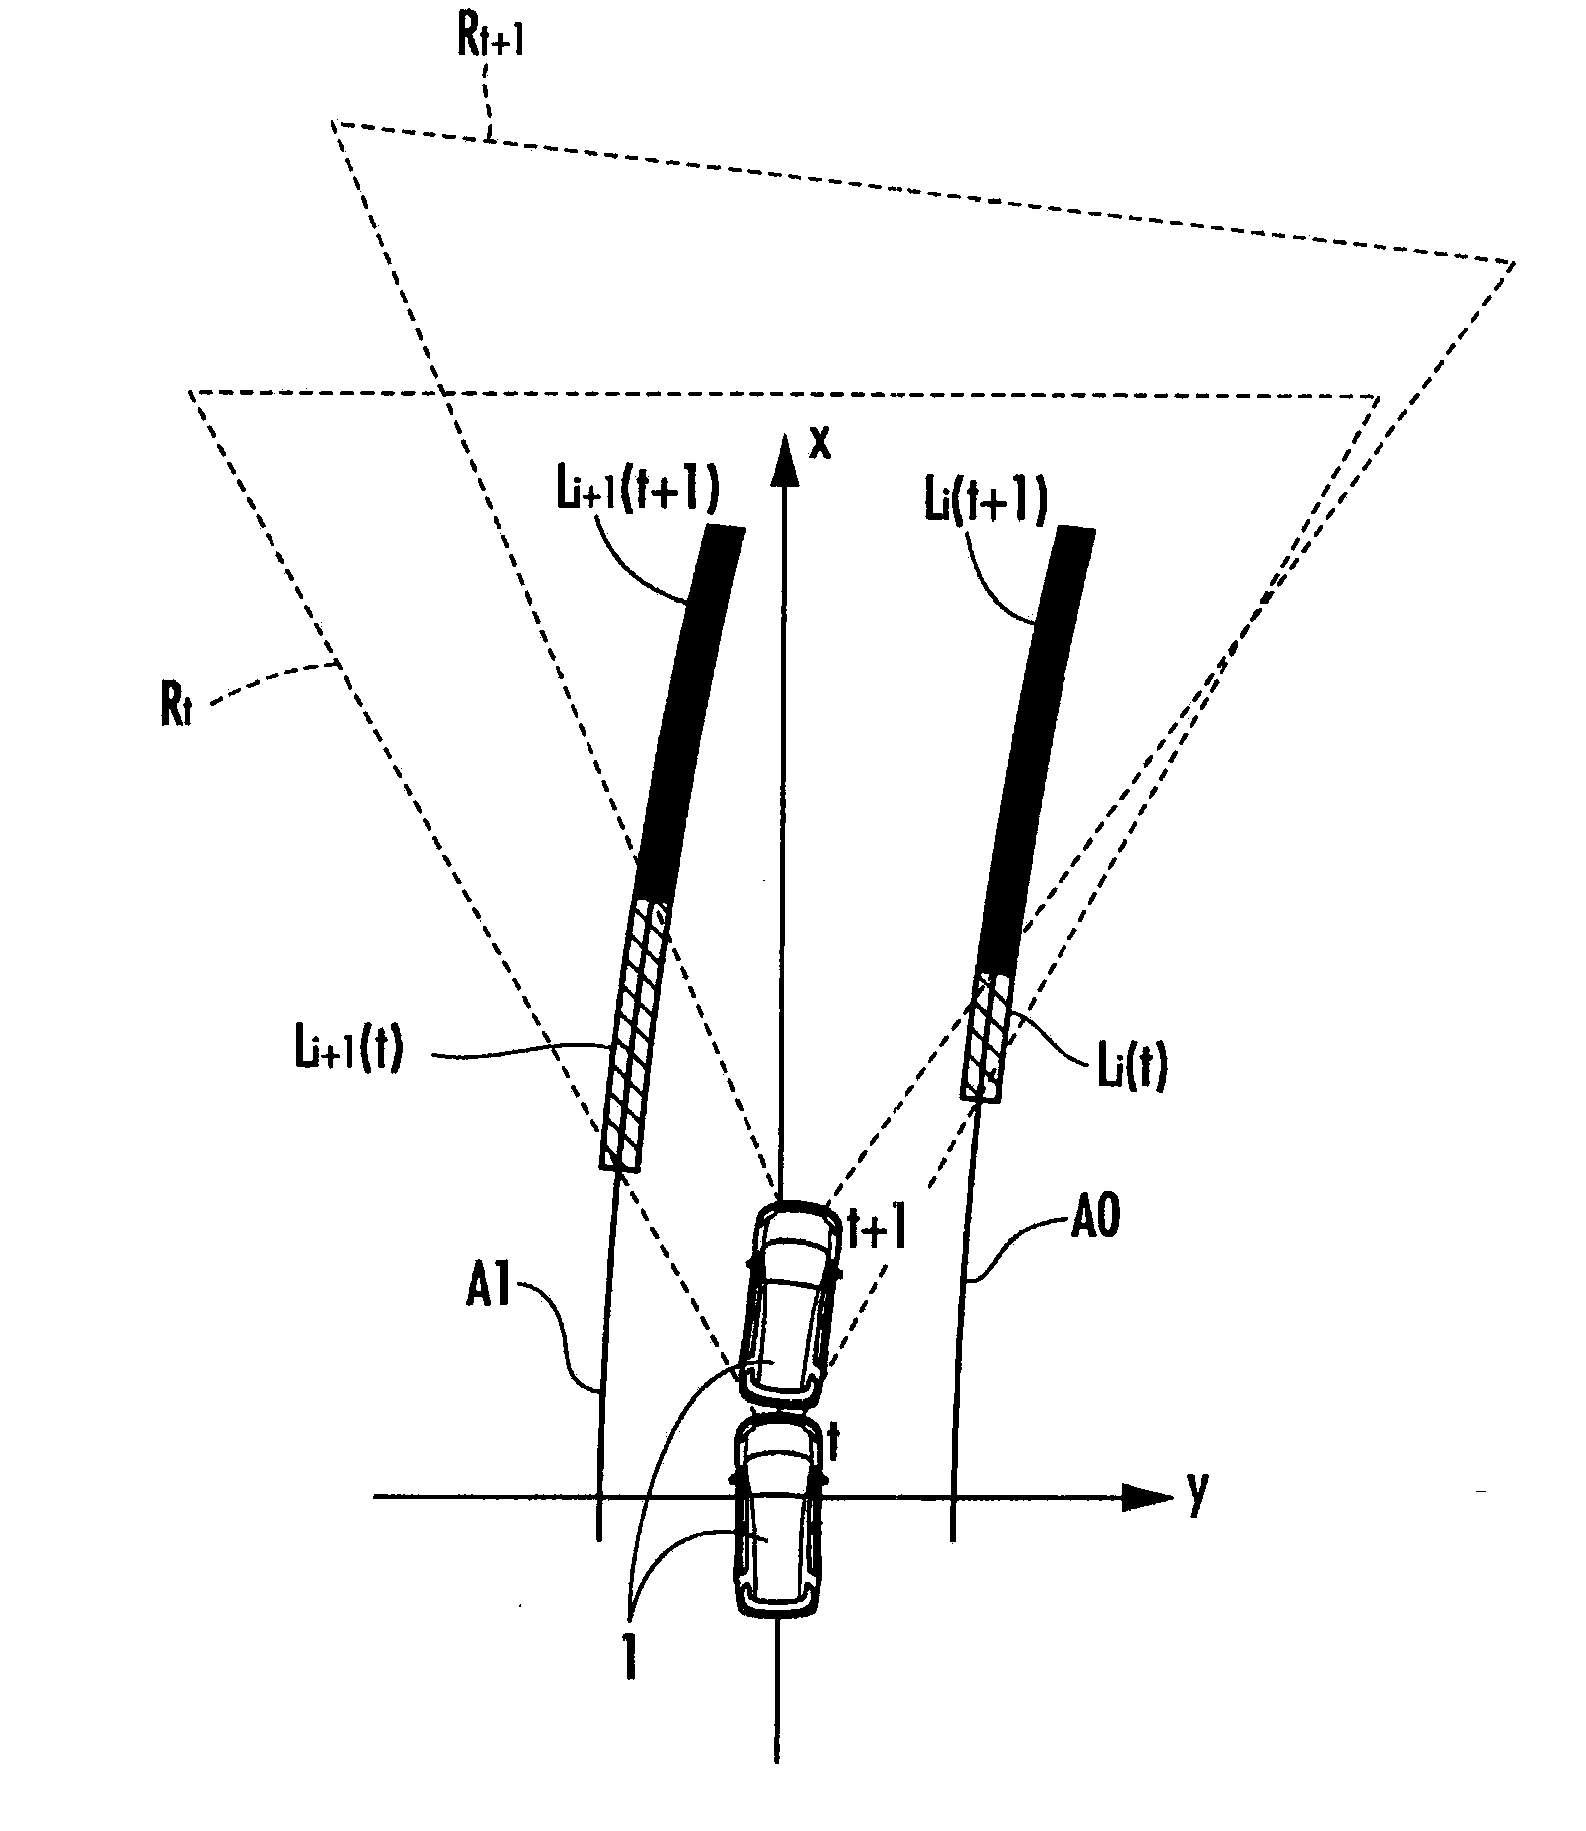 Vehicle and Lane Mark Detection Device